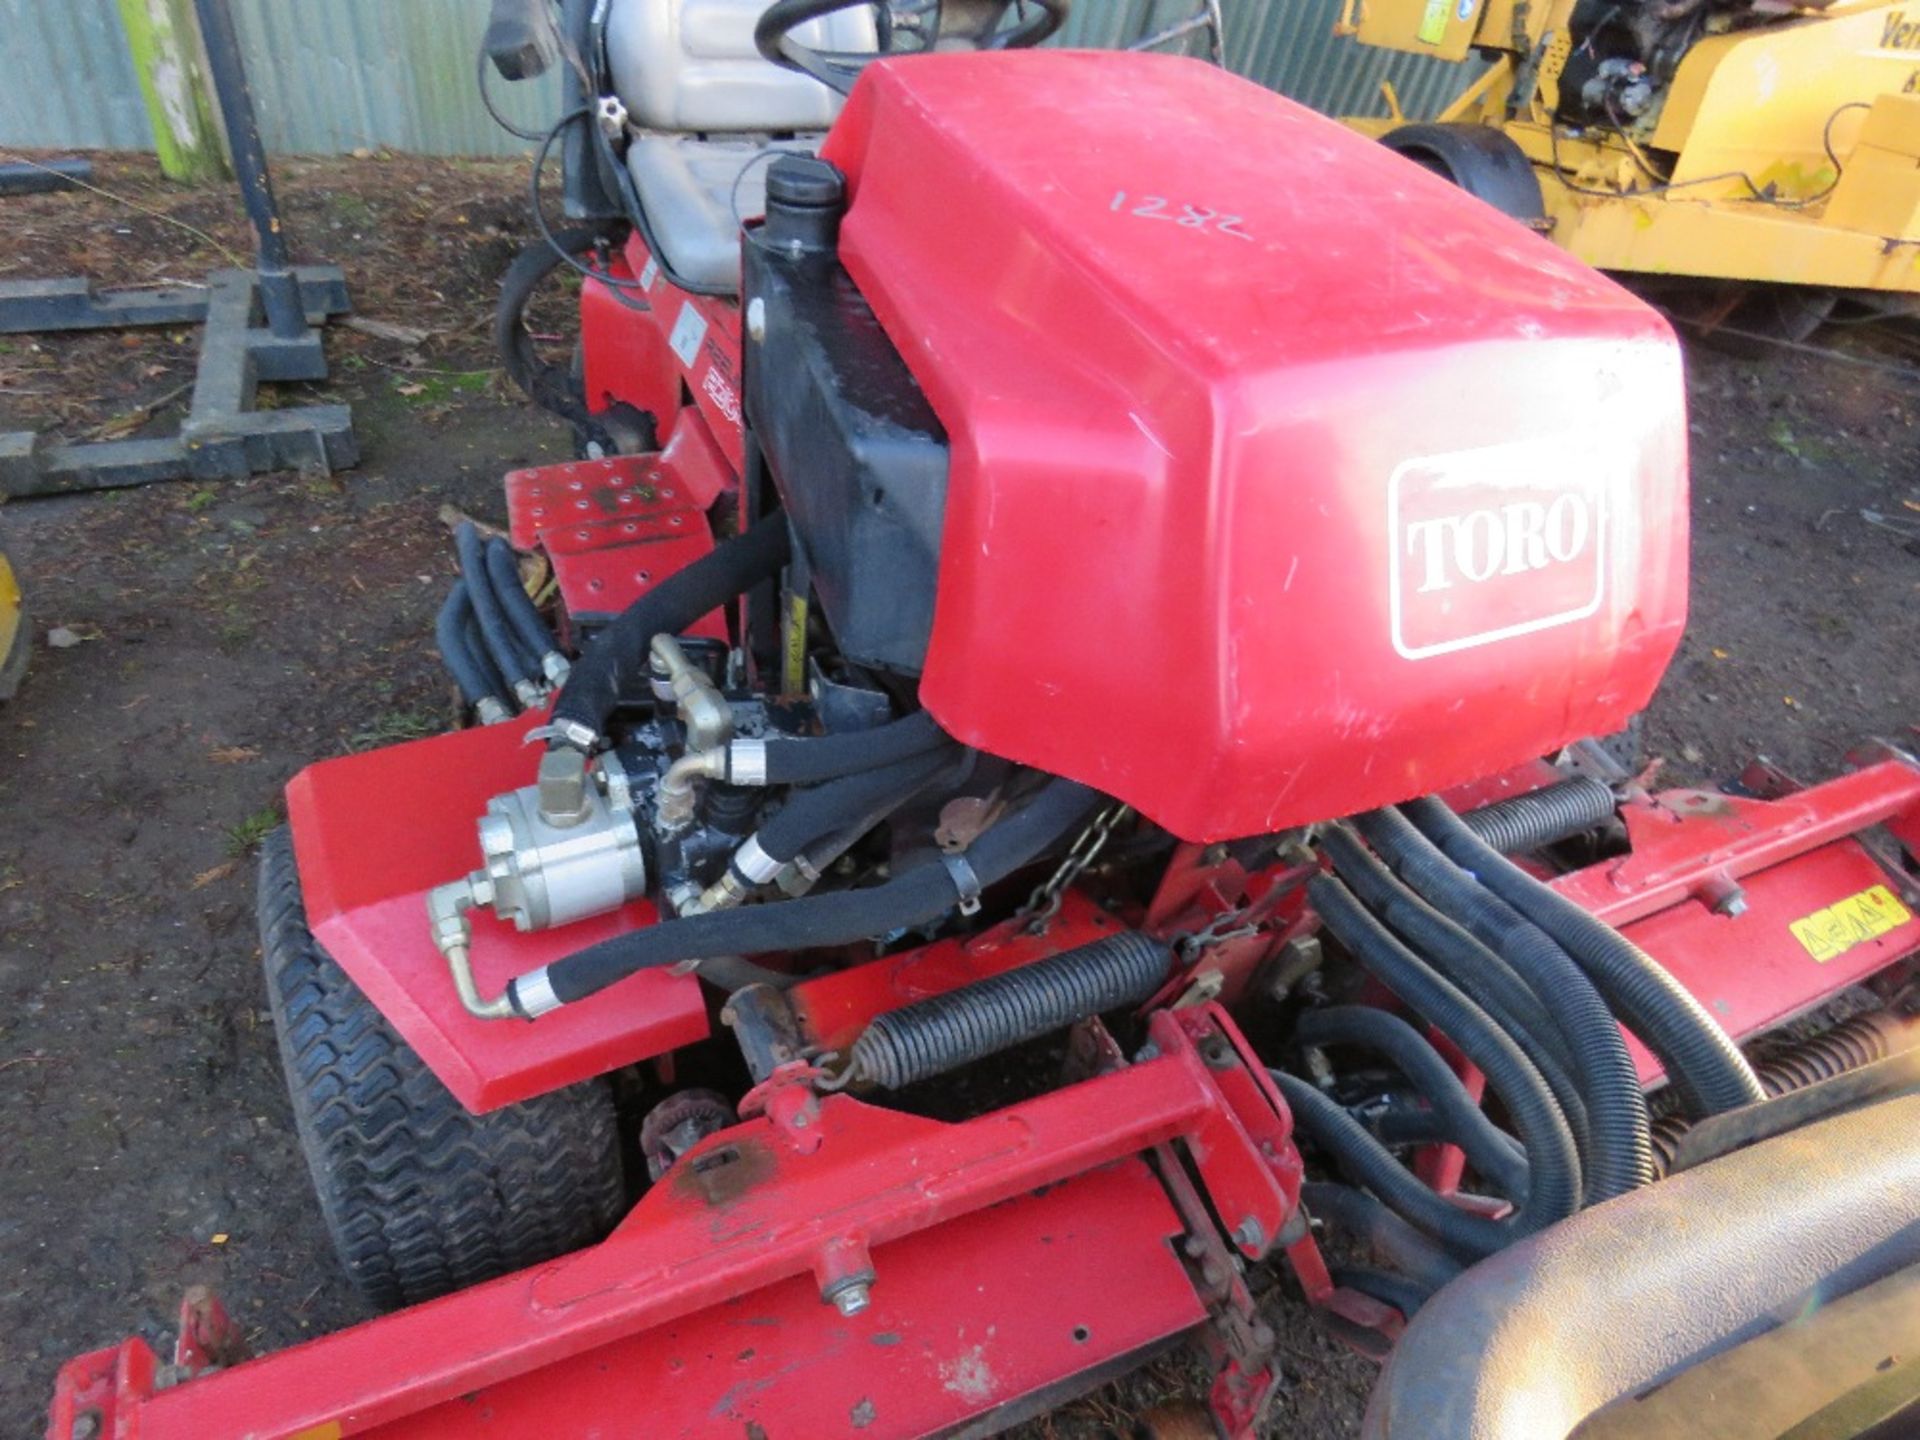 TORO REELMASTER 2300D 3218 REC HRS. TRIPLE MOWER. WHEN TESTED WAS SEEN TO DRIVE, STEER AND BLADES TU - Image 2 of 3